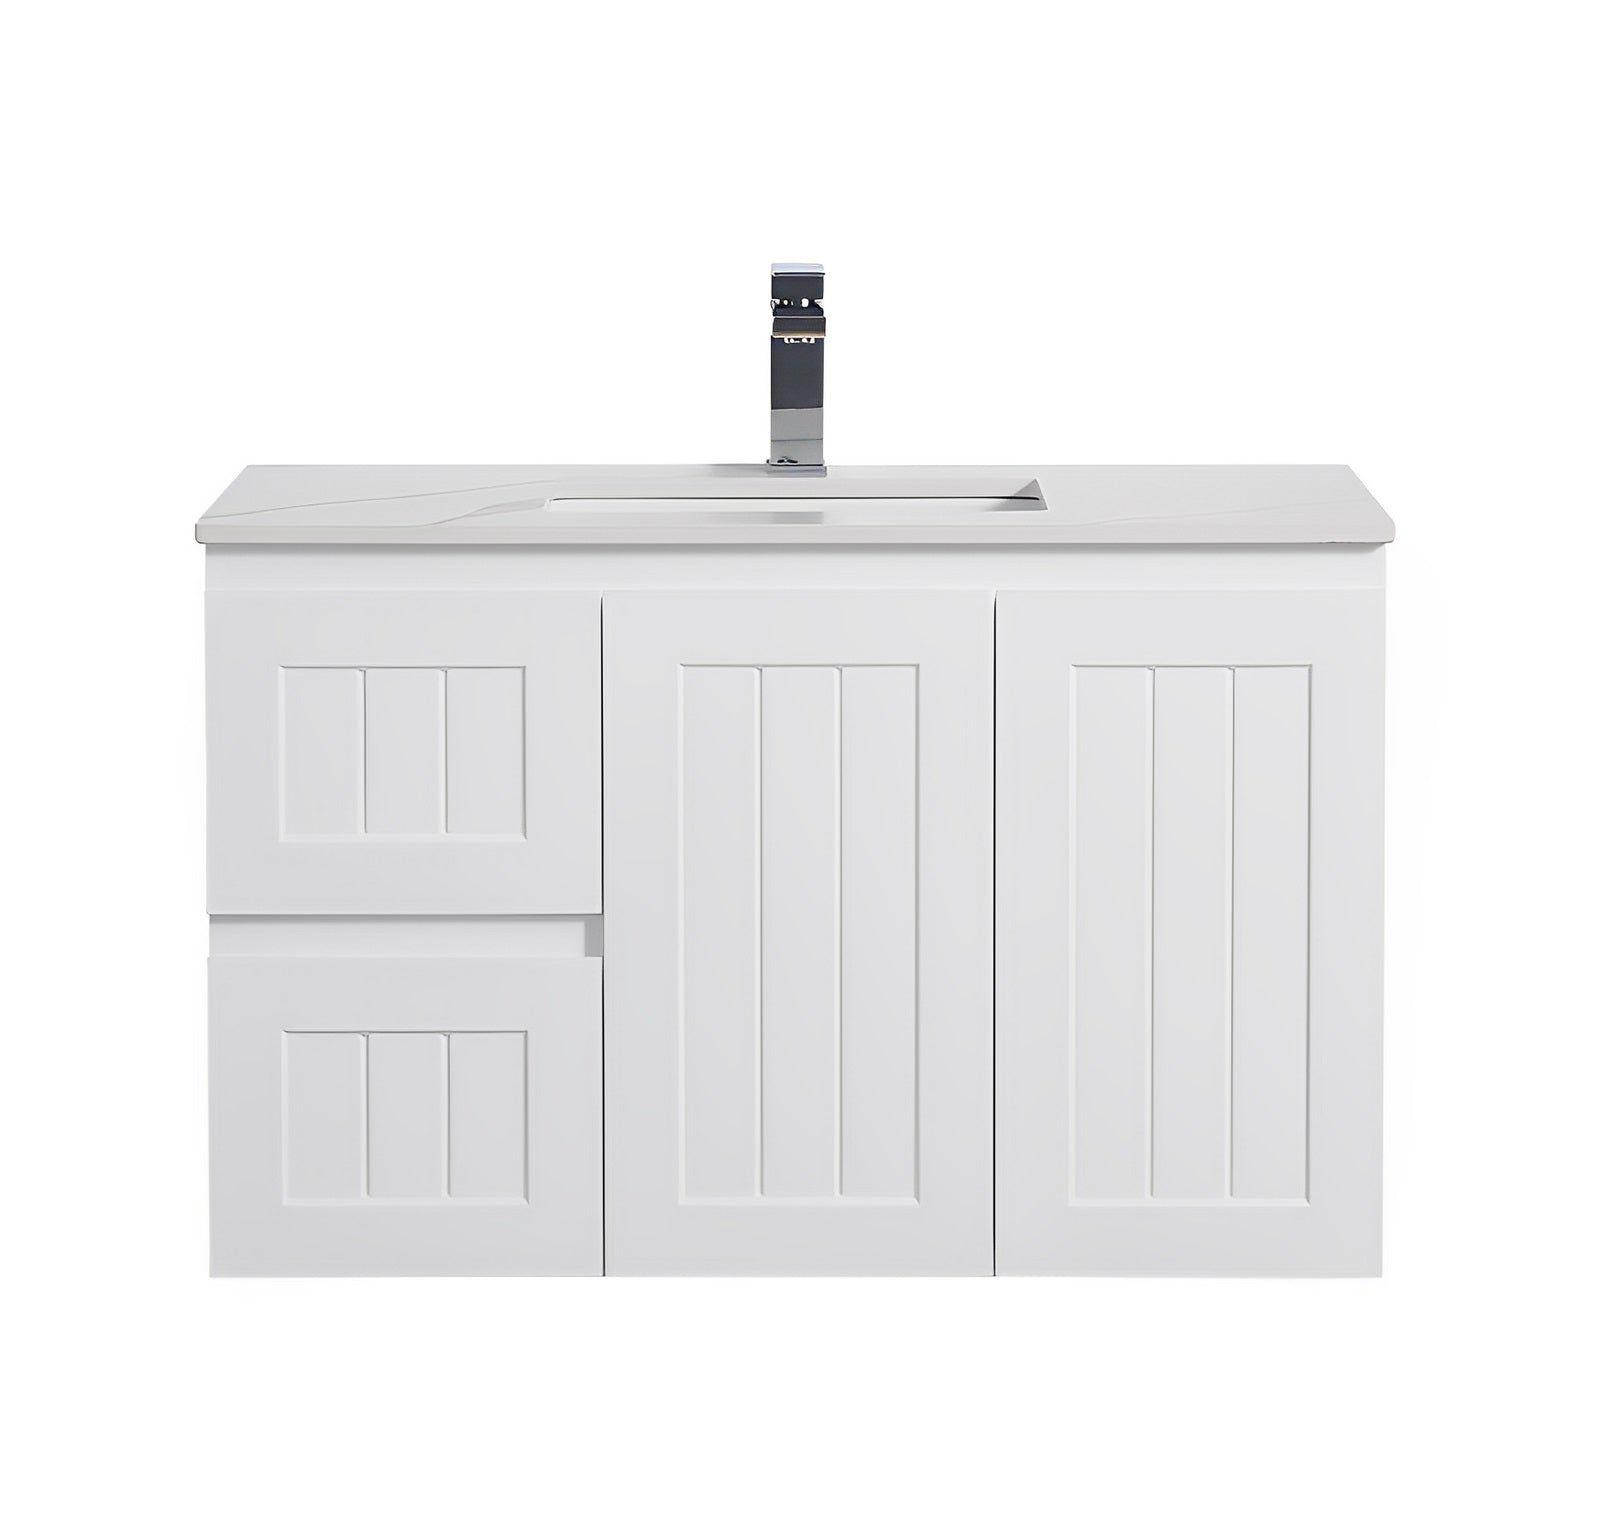 POSEIDON ACACIA SHAKER MATTE WHITE 900MM SINGLE BOWL WALL HUNG VANITY (AVAILABLE IN LEFT AND RIGHT HAND DRAWER)